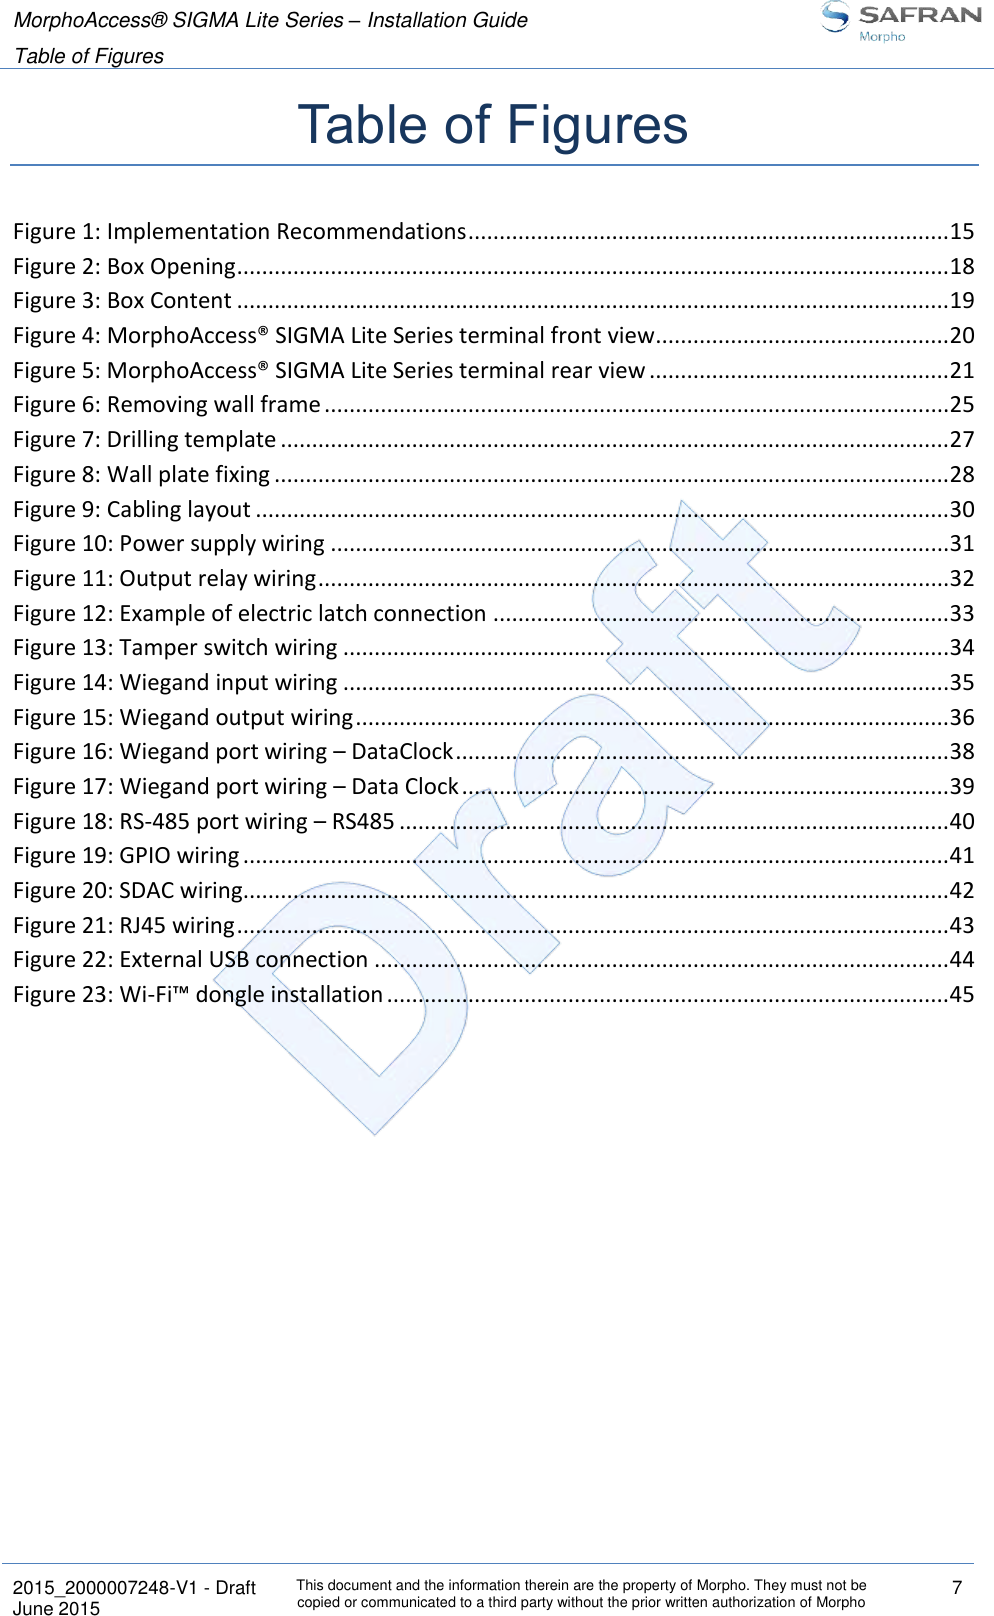 MorphoAccess® SIGMA Lite Series – Installation Guide  Table of Figures   2015_2000007248-V1 - Draft This document and the information therein are the property of Morpho. They must not be copied or communicated to a third party without the prior written authorization of Morpho 7 June 2015   Table of Figures Figure 1: Implementation Recommendations ............................................................................. 15 Figure 2: Box Opening .................................................................................................................. 18 Figure 3: Box Content .................................................................................................................. 19 Figure 4: MorphoAccess® SIGMA Lite Series terminal front view ............................................... 20 Figure 5: MorphoAccess® SIGMA Lite Series terminal rear view ................................................ 21 Figure 6: Removing wall frame .................................................................................................... 25 Figure 7: Drilling template ........................................................................................................... 27 Figure 8: Wall plate fixing ............................................................................................................ 28 Figure 9: Cabling layout ............................................................................................................... 30 Figure 10: Power supply wiring ................................................................................................... 31 Figure 11: Output relay wiring ..................................................................................................... 32 Figure 12: Example of electric latch connection ......................................................................... 33 Figure 13: Tamper switch wiring ................................................................................................. 34 Figure 14: Wiegand input wiring ................................................................................................. 35 Figure 15: Wiegand output wiring ............................................................................................... 36 Figure 16: Wiegand port wiring – DataClock ............................................................................... 38 Figure 17: Wiegand port wiring – Data Clock .............................................................................. 39 Figure 18: RS-485 port wiring – RS485 ........................................................................................ 40 Figure 19: GPIO wiring ................................................................................................................. 41 Figure 20: SDAC wiring................................................................................................................. 42 Figure 21: RJ45 wiring .................................................................................................................. 43 Figure 22: External USB connection ............................................................................................ 44 Figure 23: Wi-Fi™ dongle installation .......................................................................................... 45  